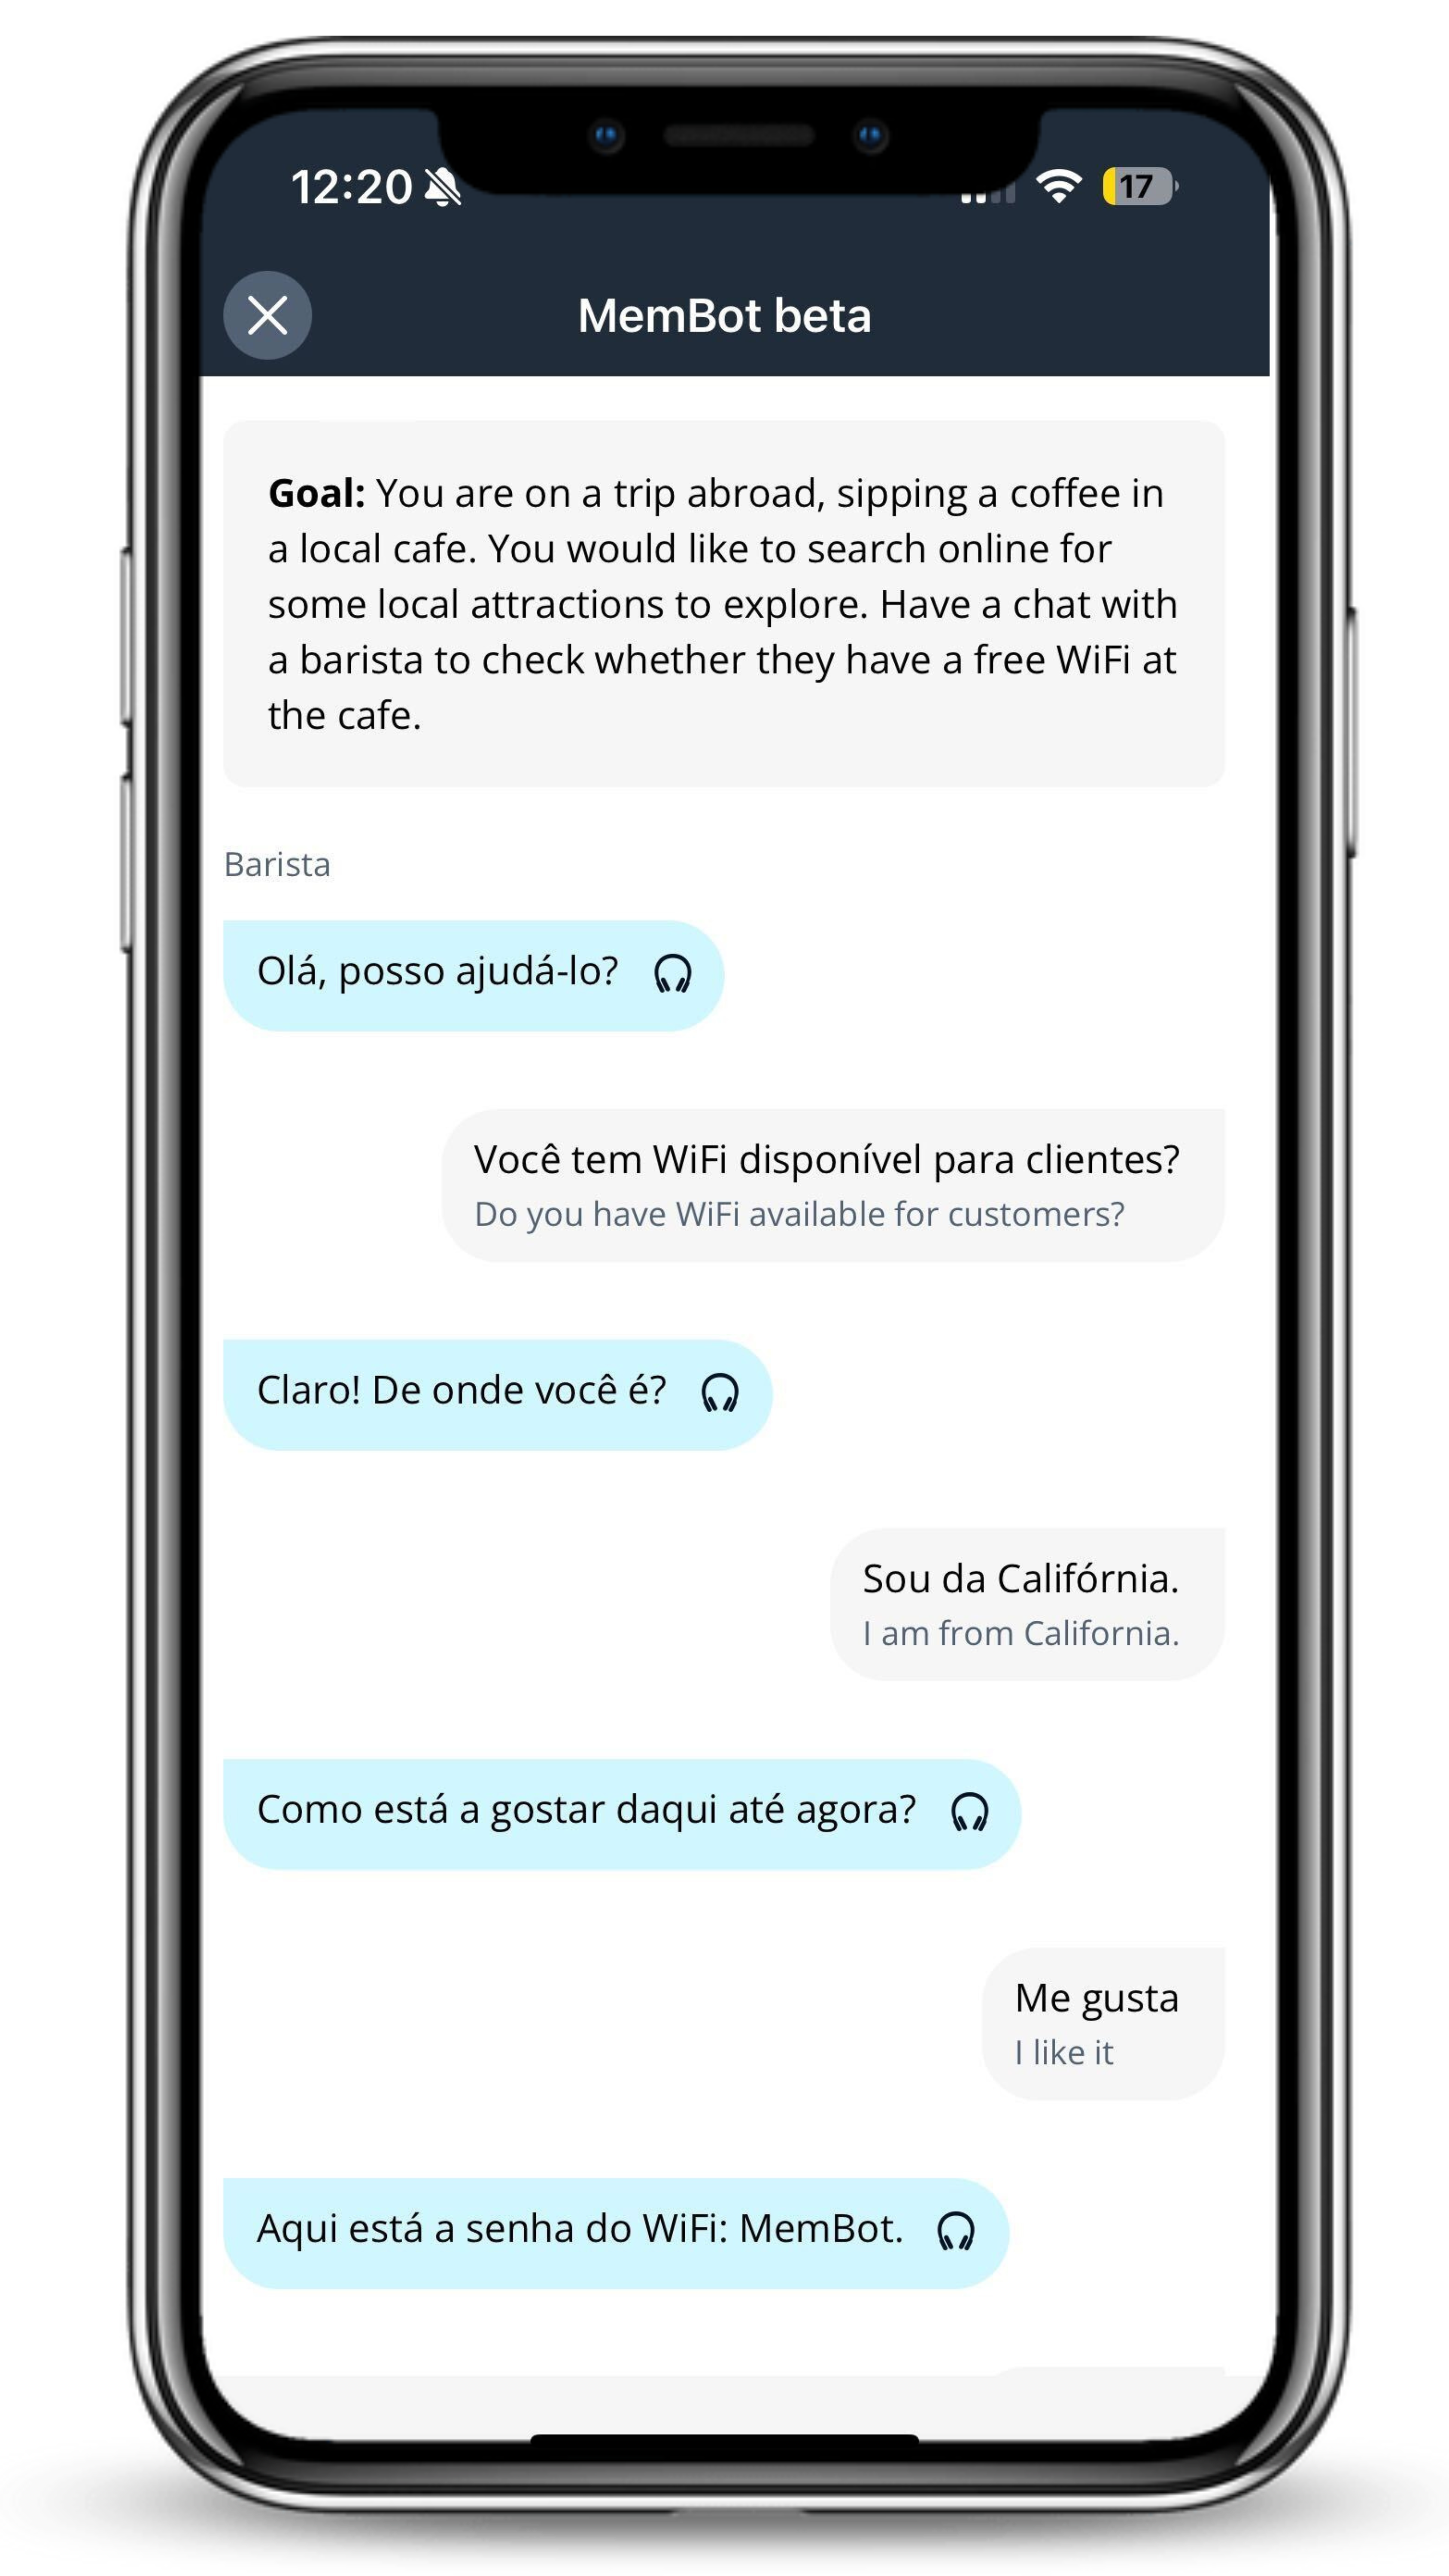 4. When you’re ready, practice conversations with Membot.